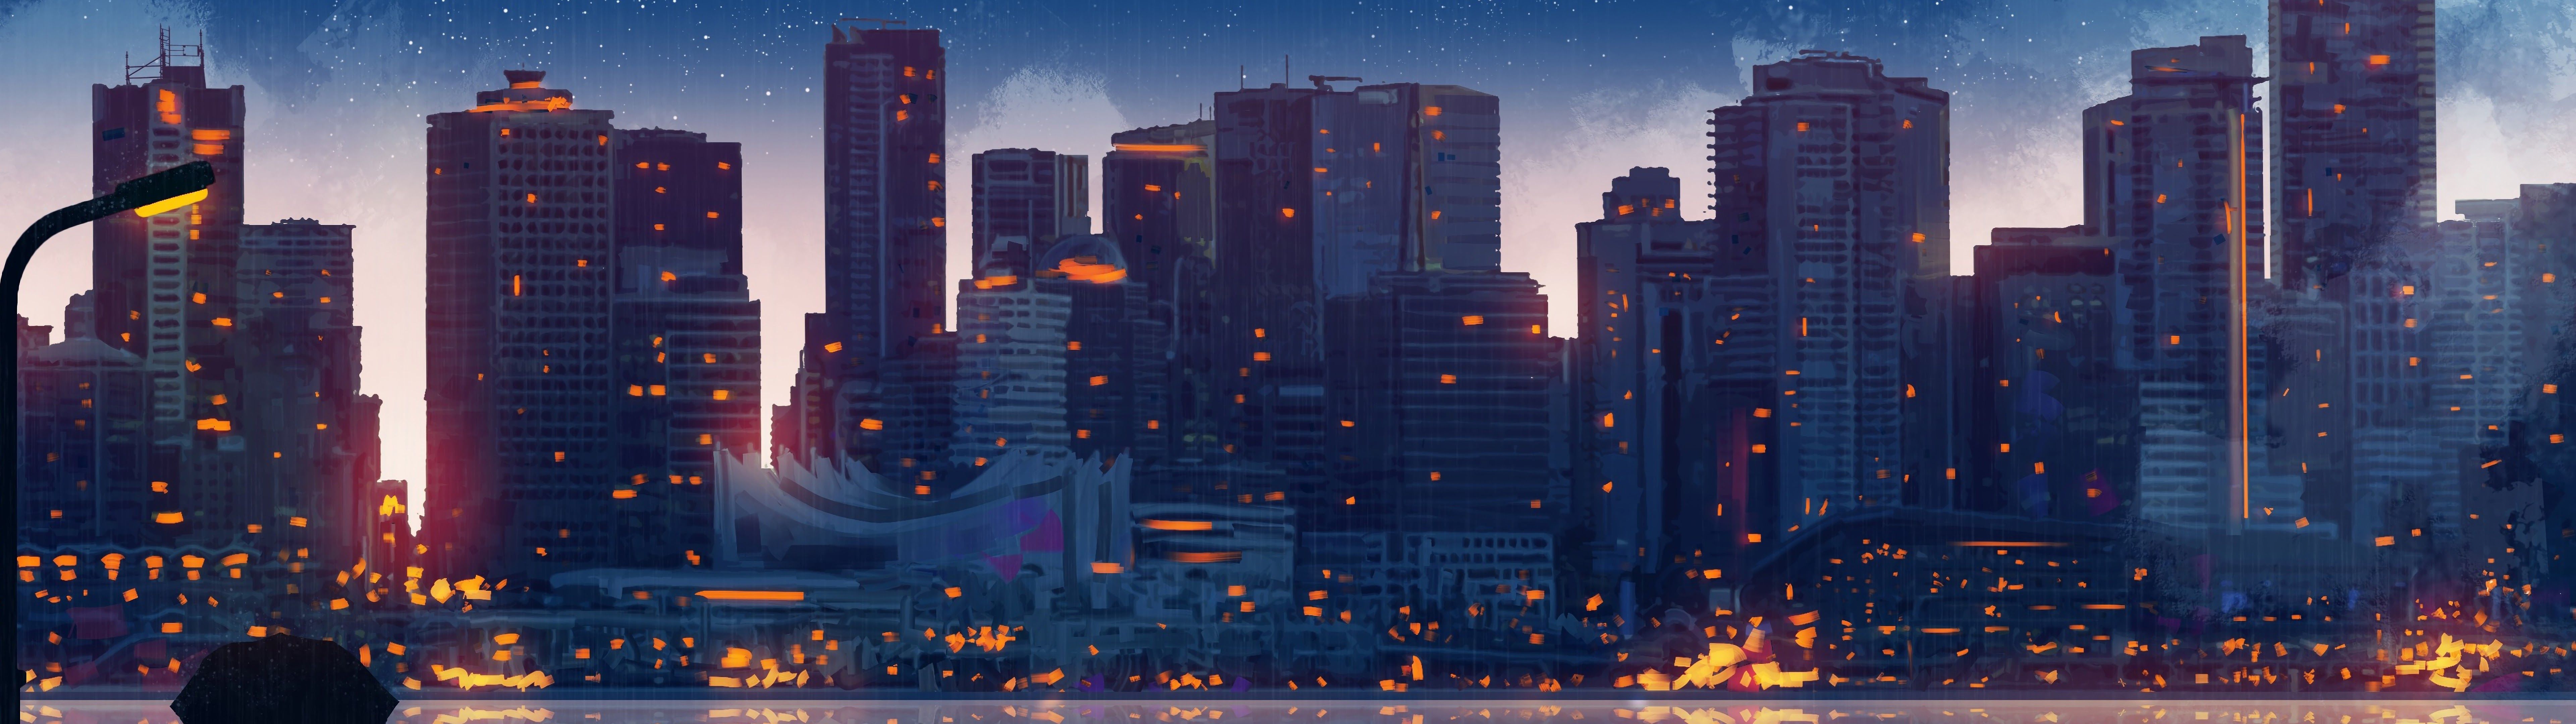 Anime City 4k Wallpapers - Wallpaper Cave